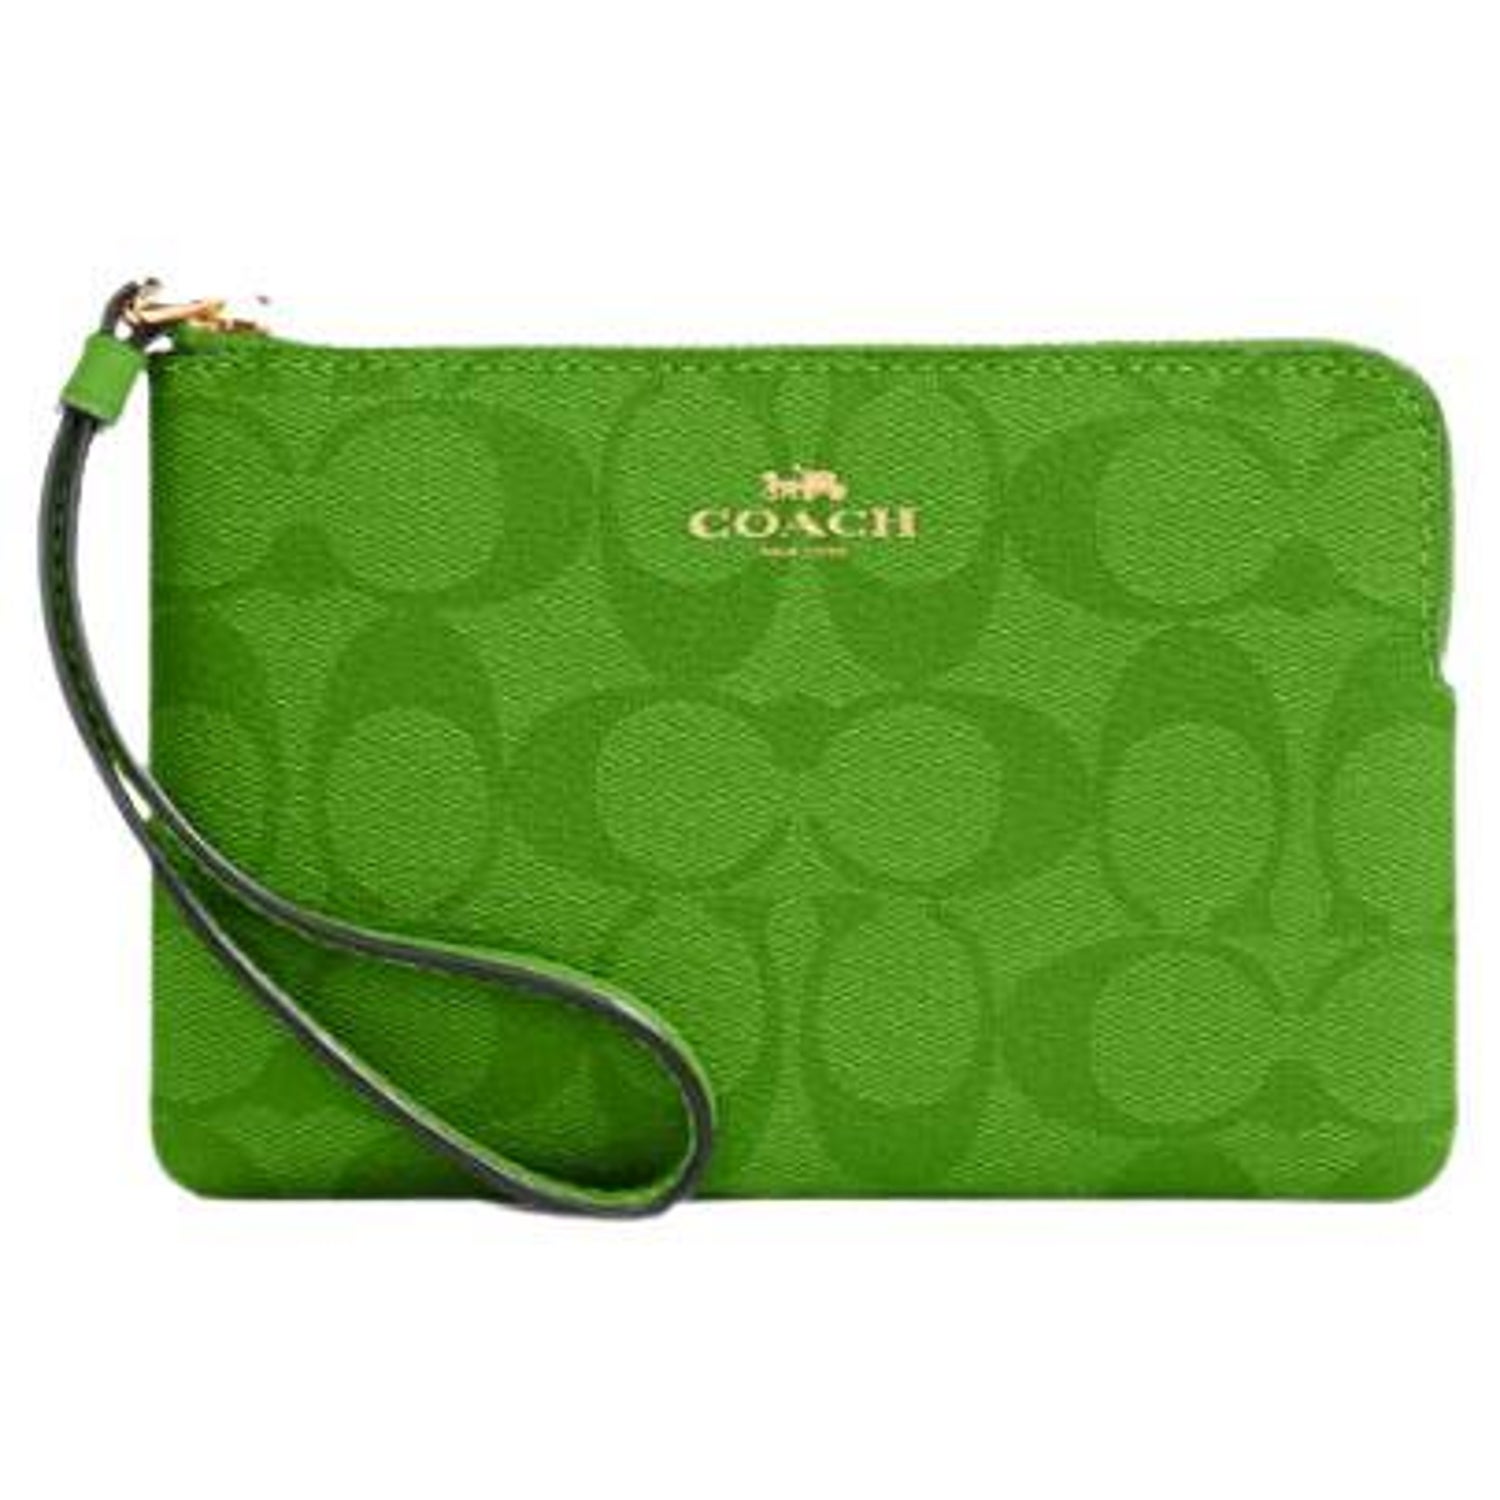 Best Lime Green Coach Bag for sale